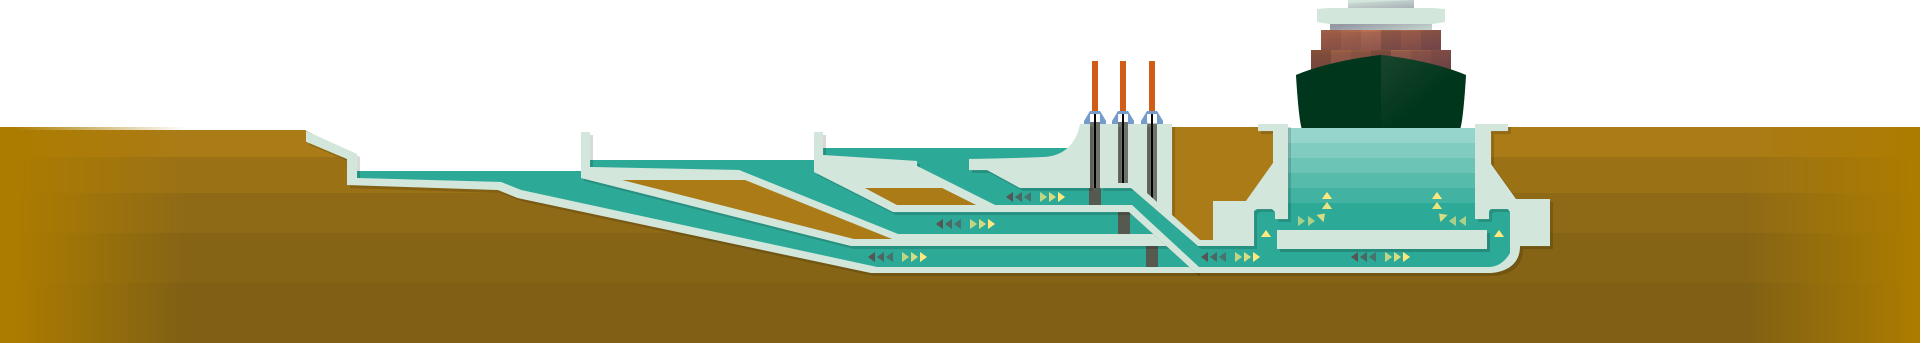 Illustration of boat in canal